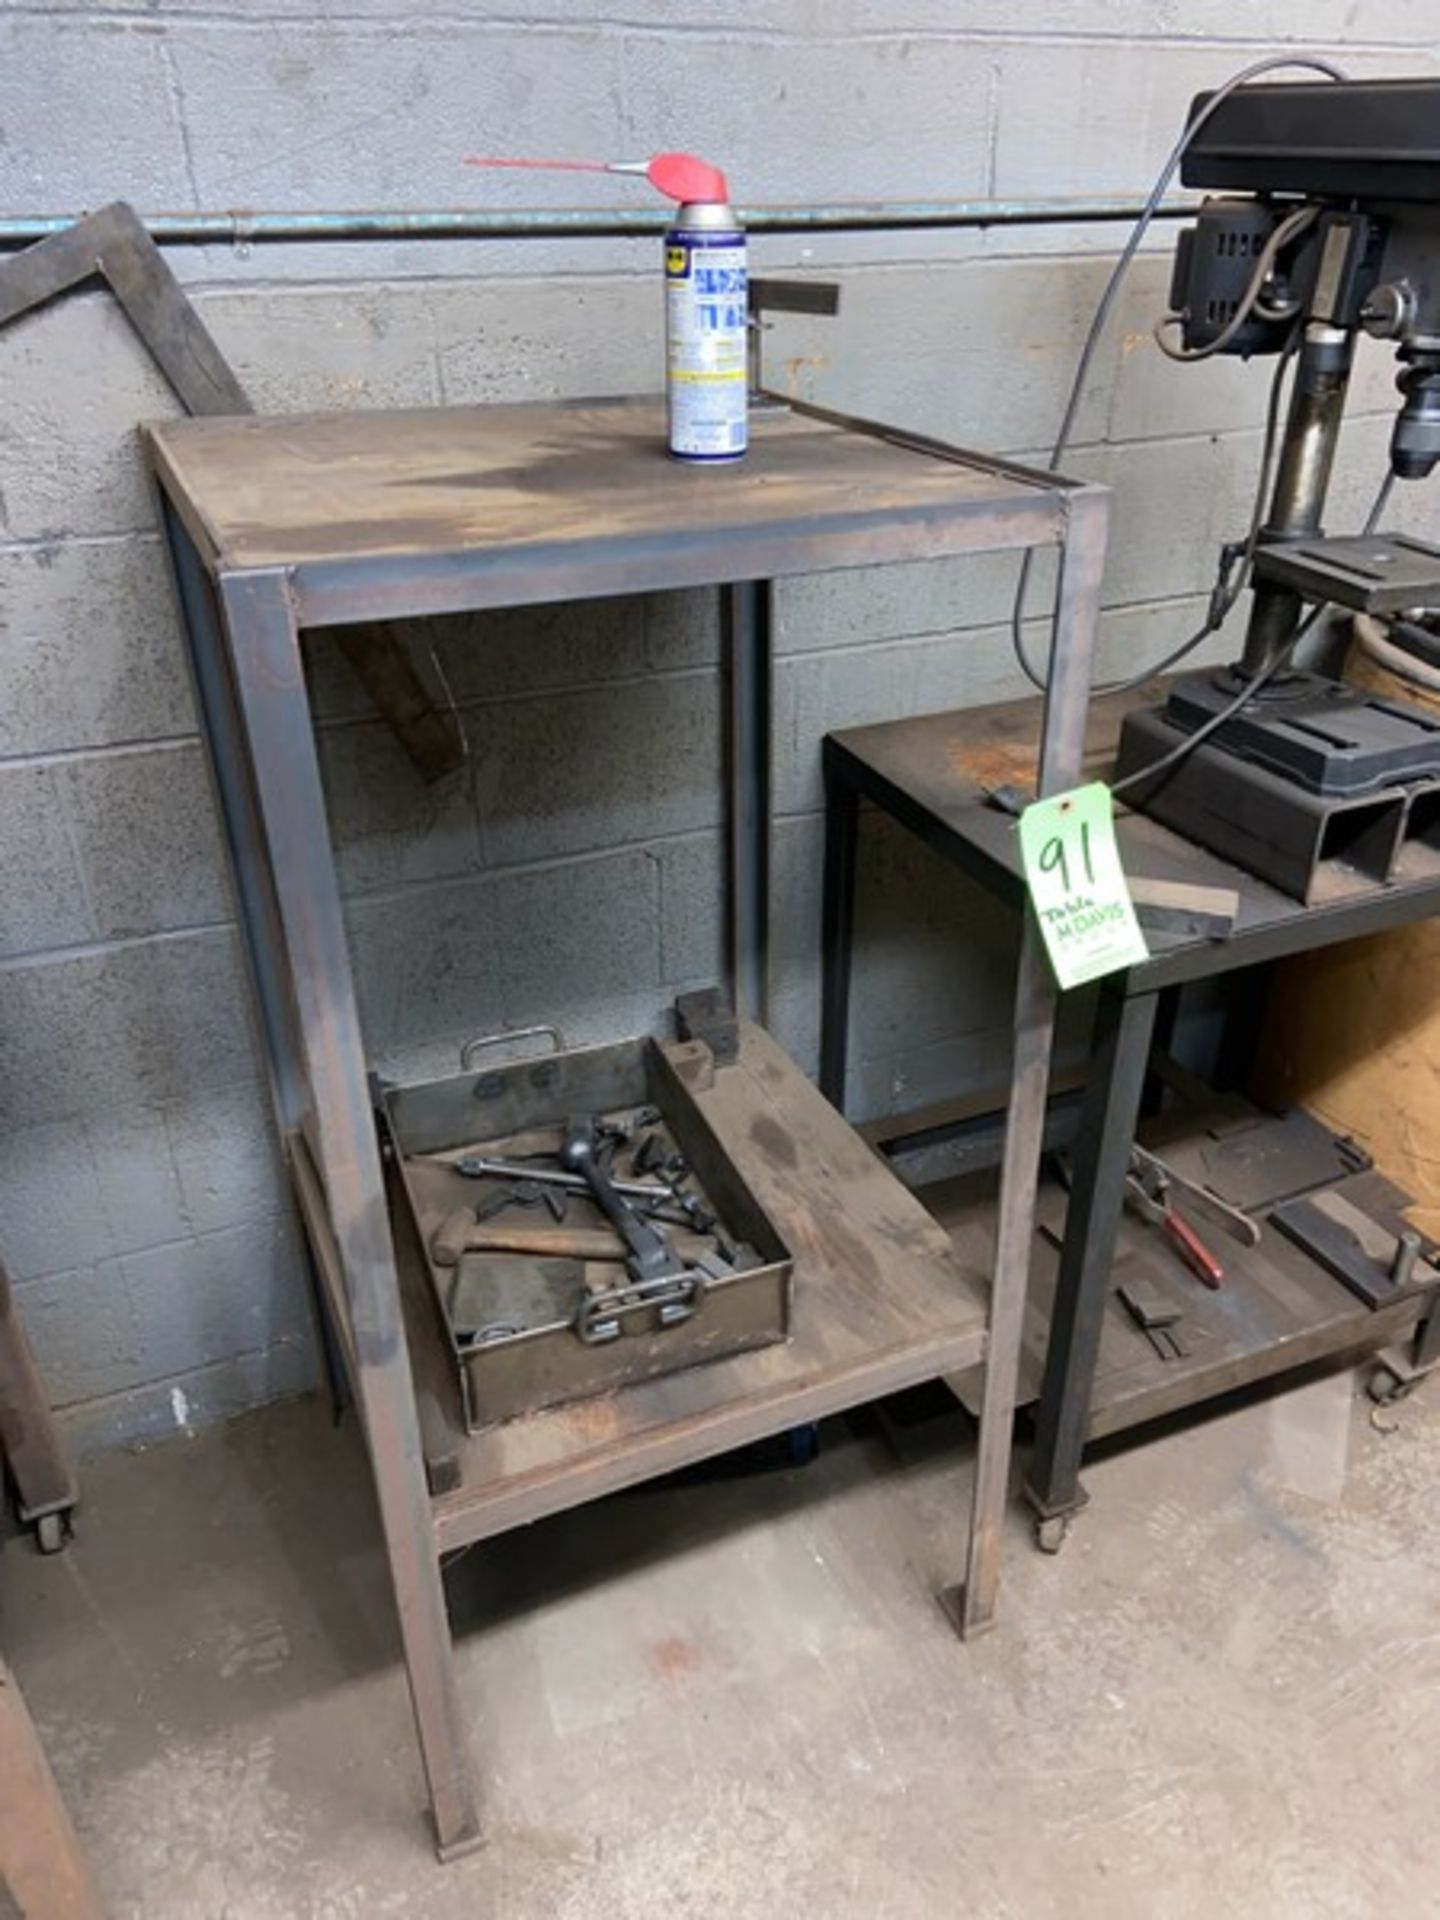 Double Shelf Table, Overall Dims.: Aprox. 24-1/2” L x 24-1/2” W x 49” H (LOCATED IN CORRY, PA) - Image 2 of 2